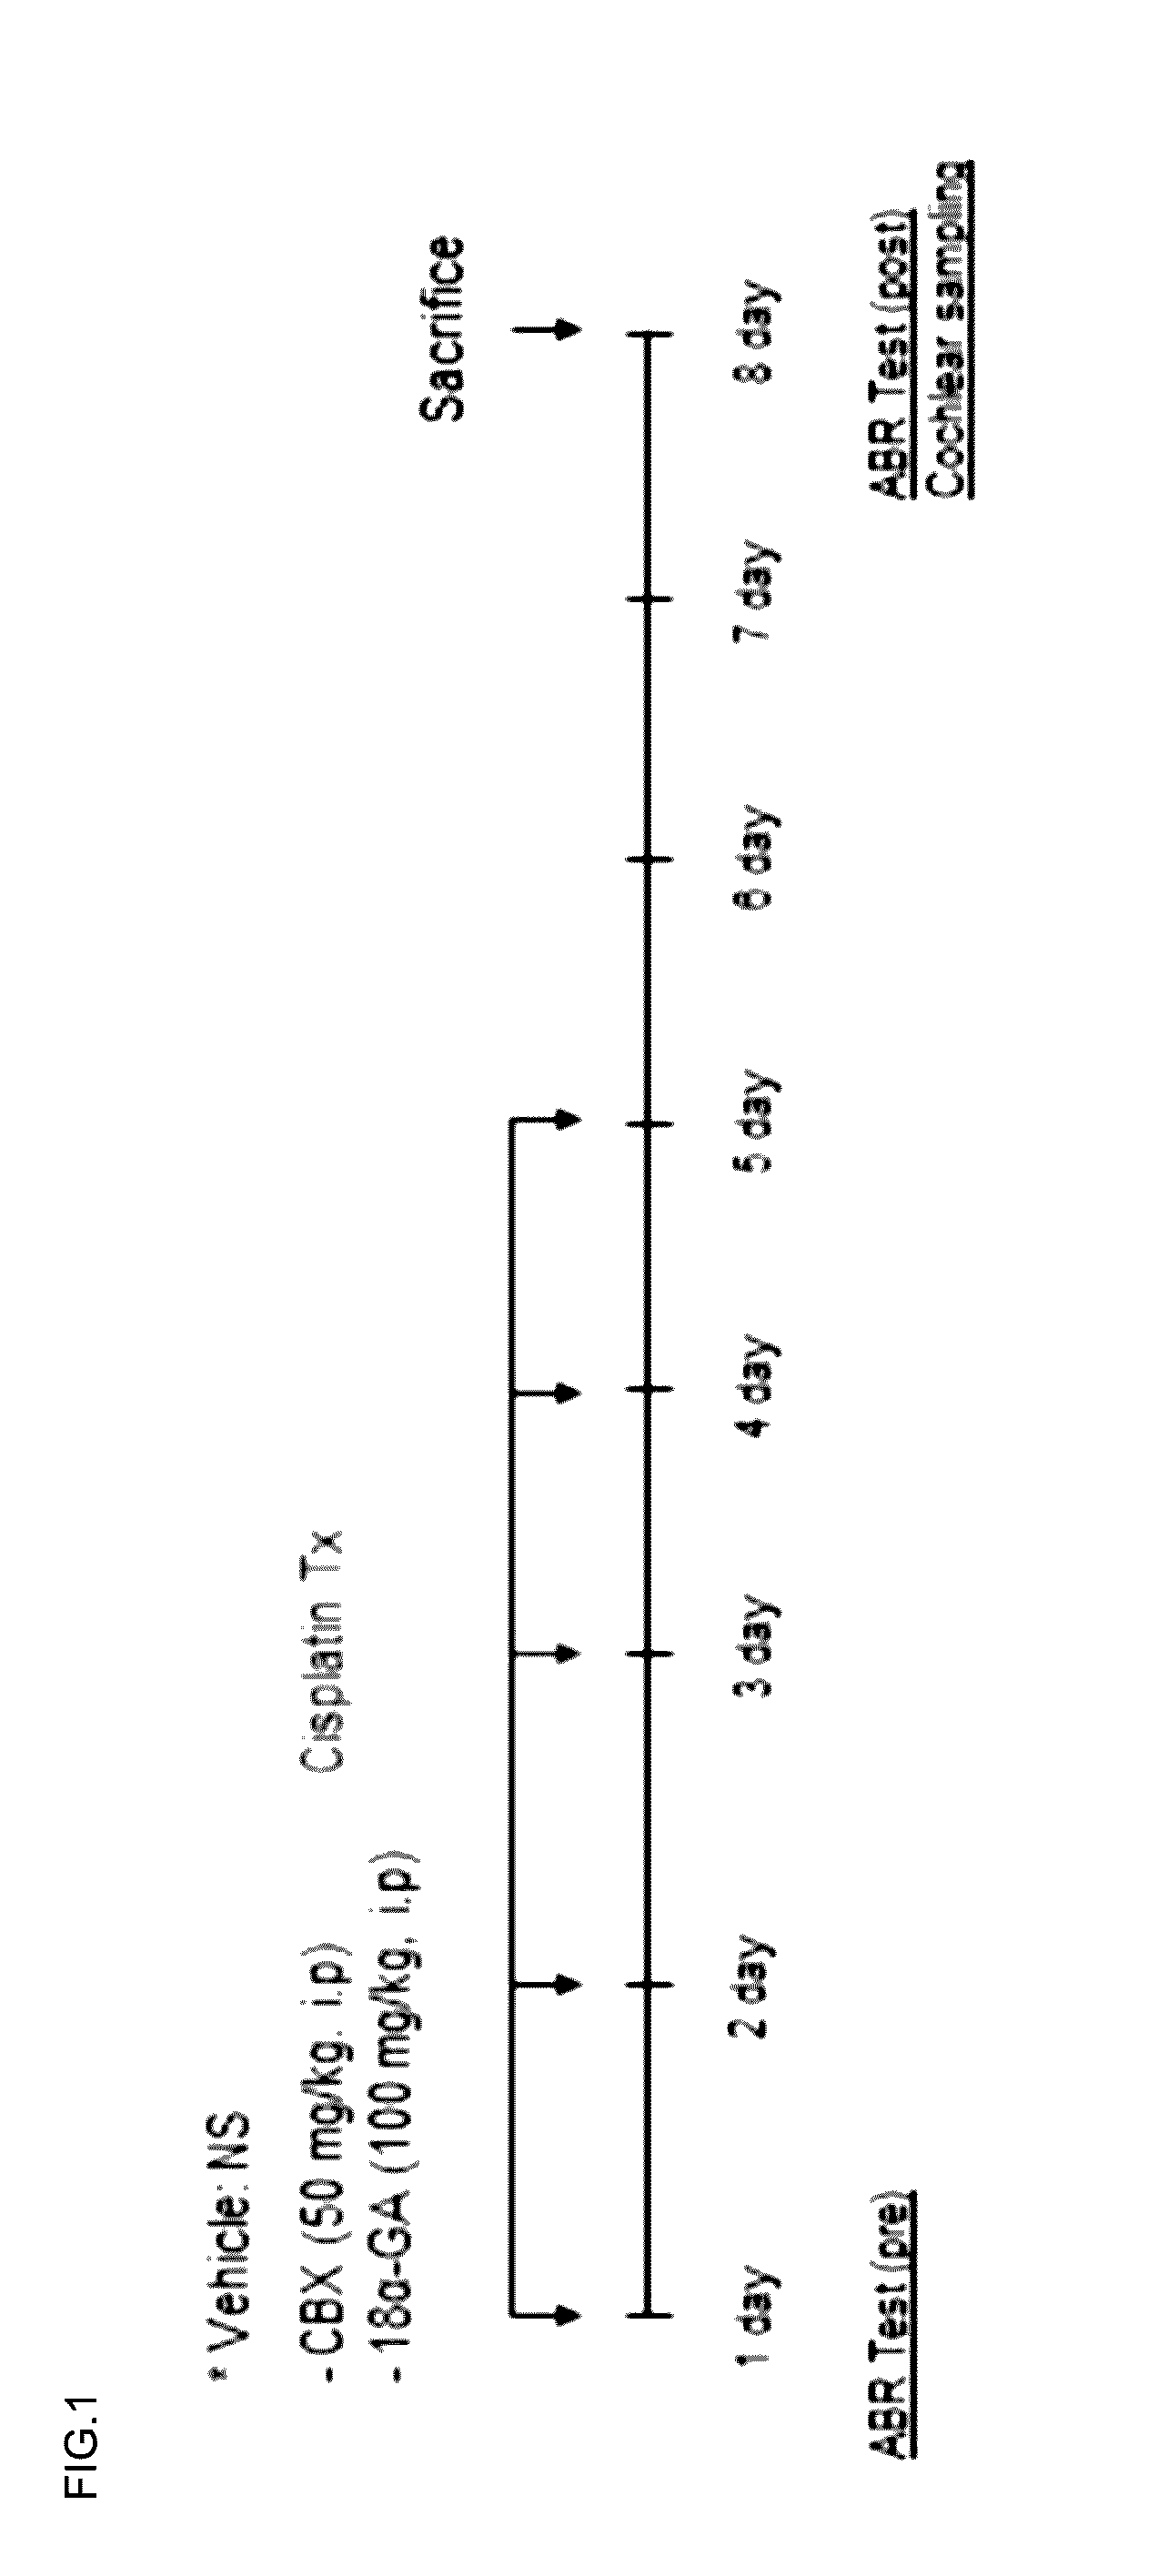 Pharmaceutical composition for preventing or treatinghearing loss, comprising carbenoxolone or its pharmaceutically acceptable salts as effective compound